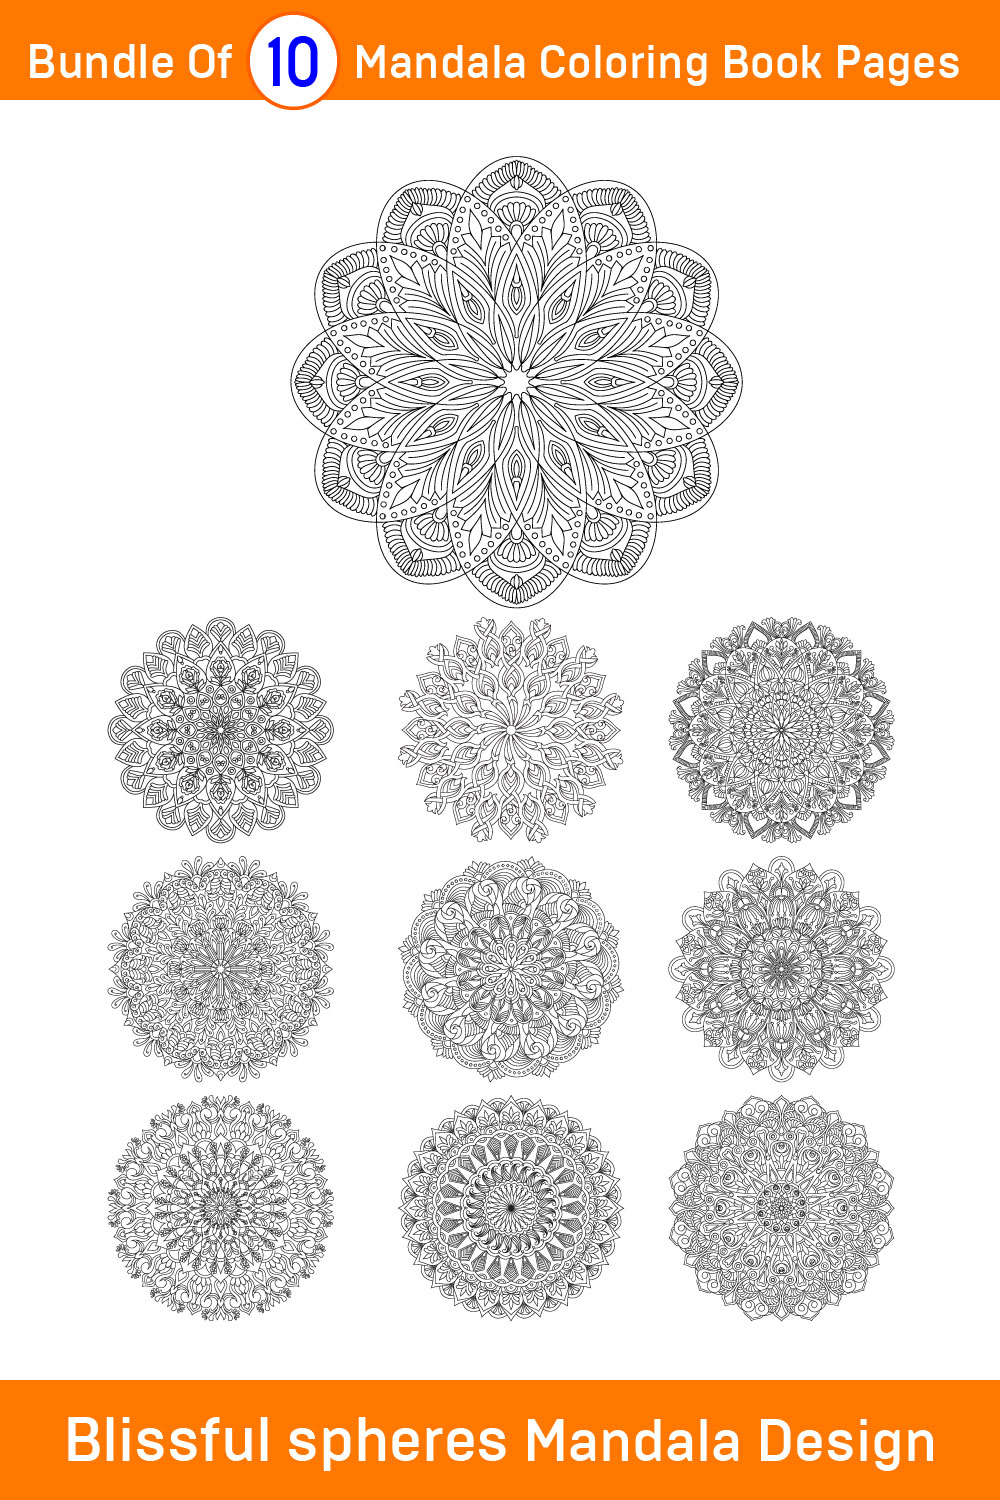 Bundle of 10 Blissful spheres Mandala Coloring Book Pages pinterest preview image.